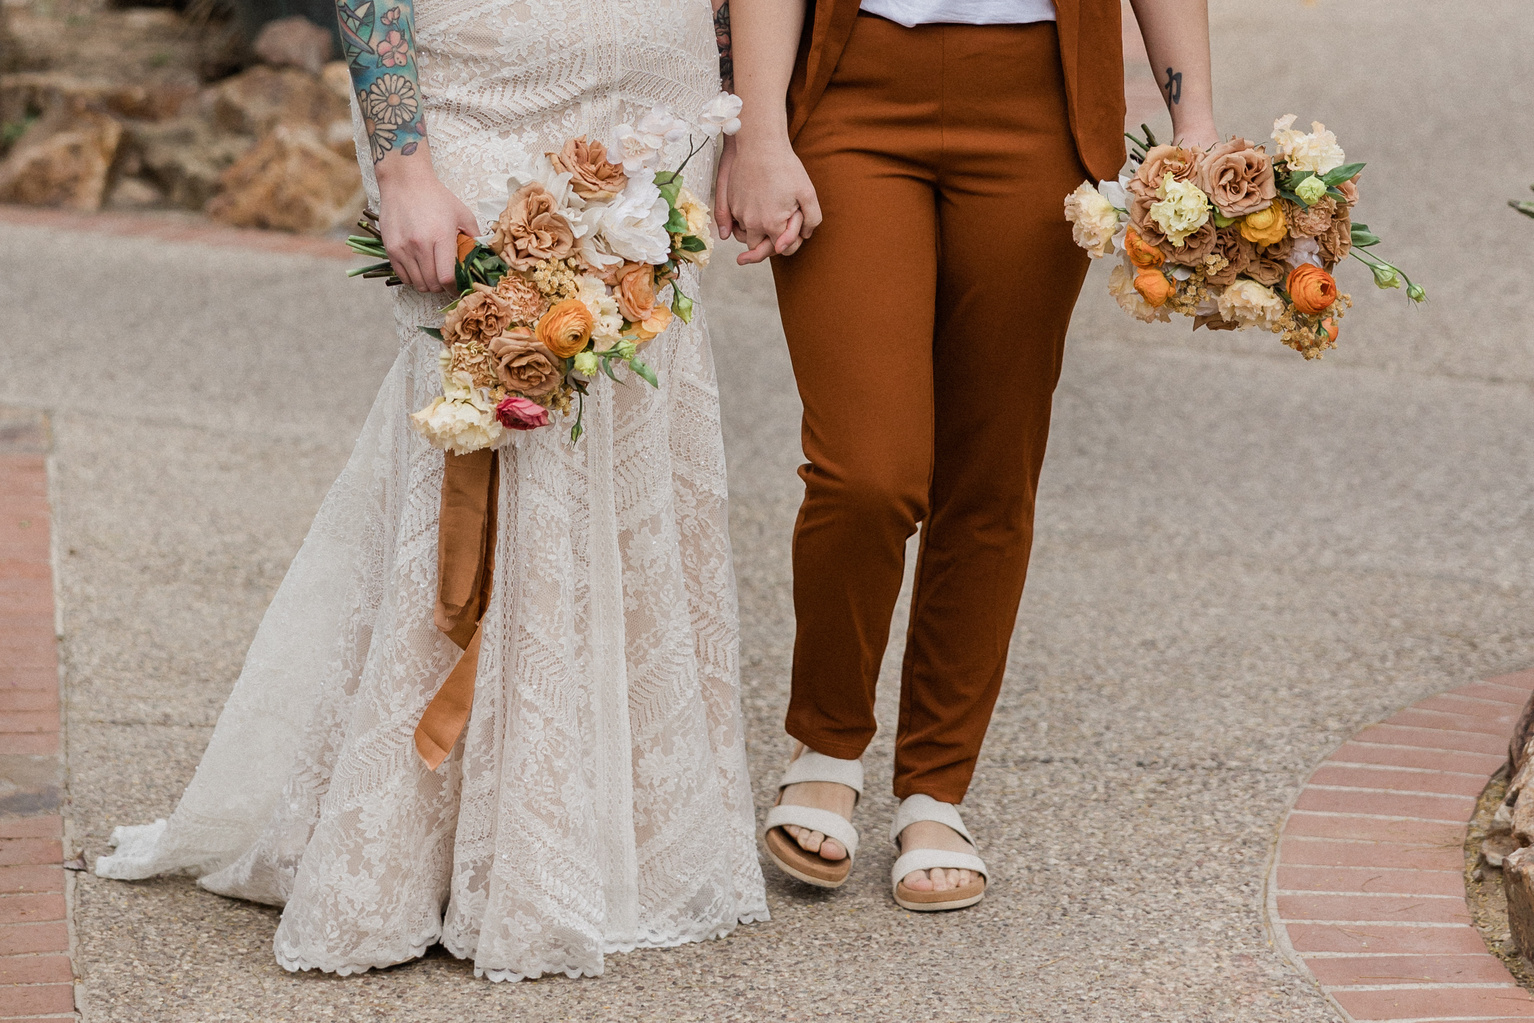 Newlywed Couple Holding Hands Walking at the Pavement